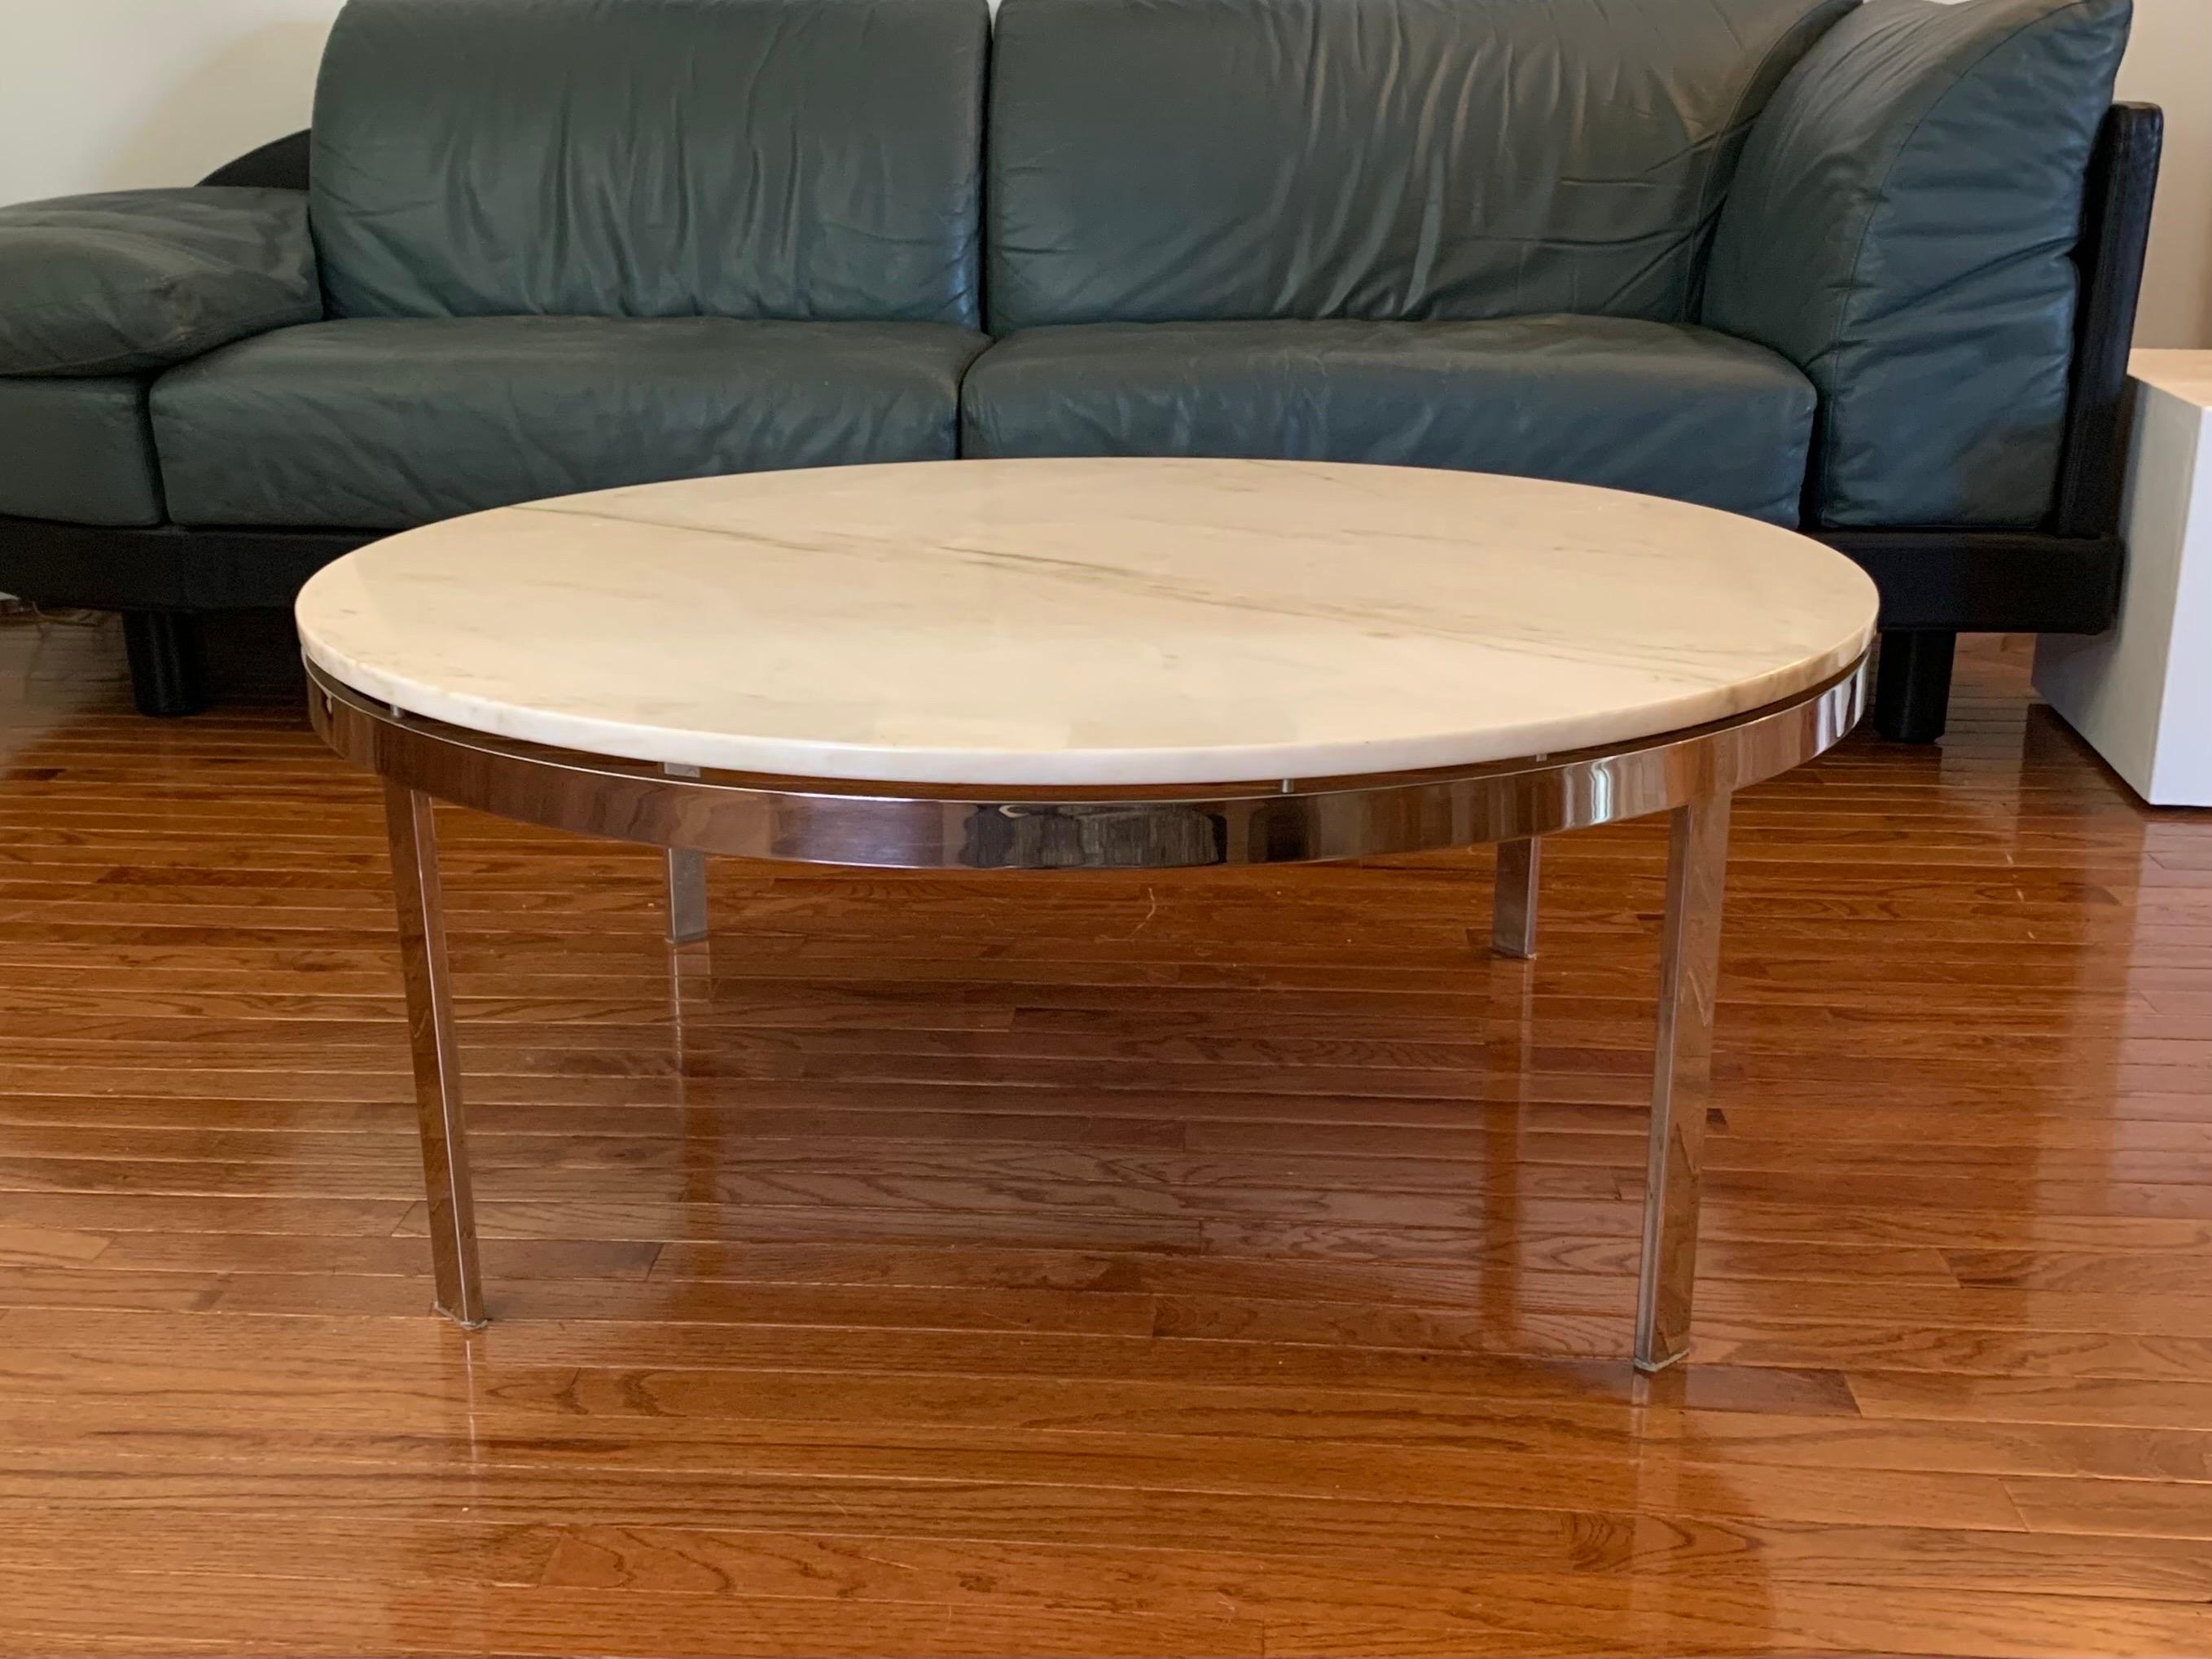 This is a round polished-steel coffee table with a Calacatta Gold marble top, designed by Nicos Zographos and produced by Zographos Designs Limited in the 1970s.

Zographos’ pieces are widely known for their high-quality construction, and the